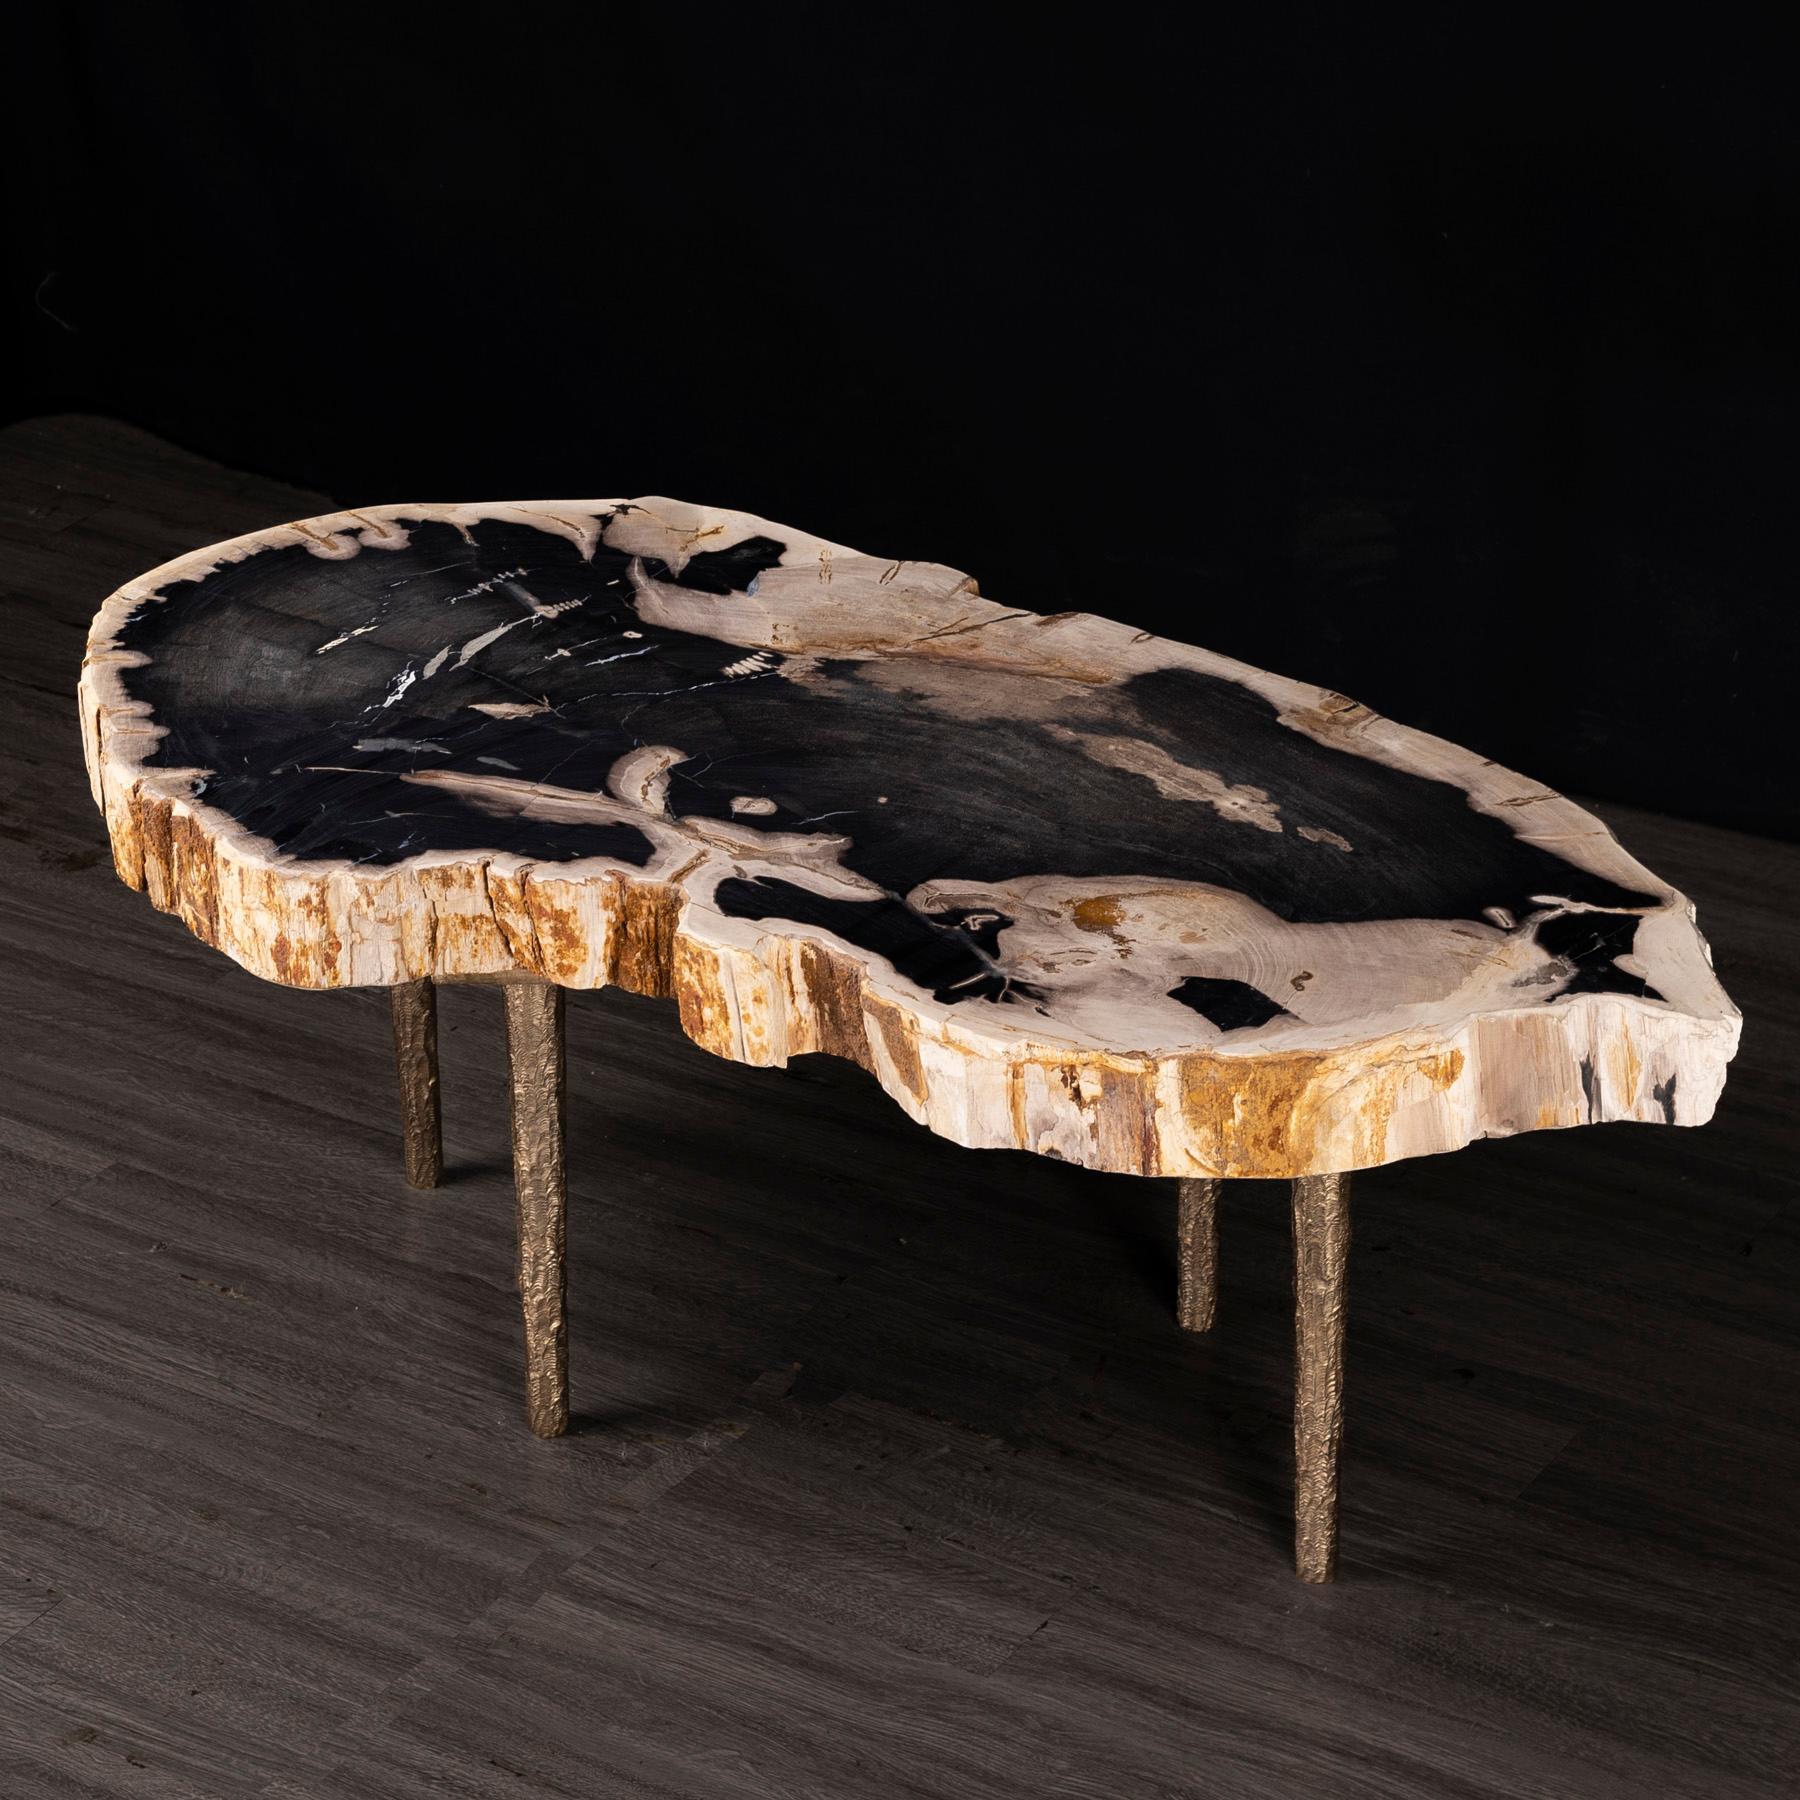 Organic Modern Side or Coffee Table, Petrified Wood with Solid Bronze Base legs